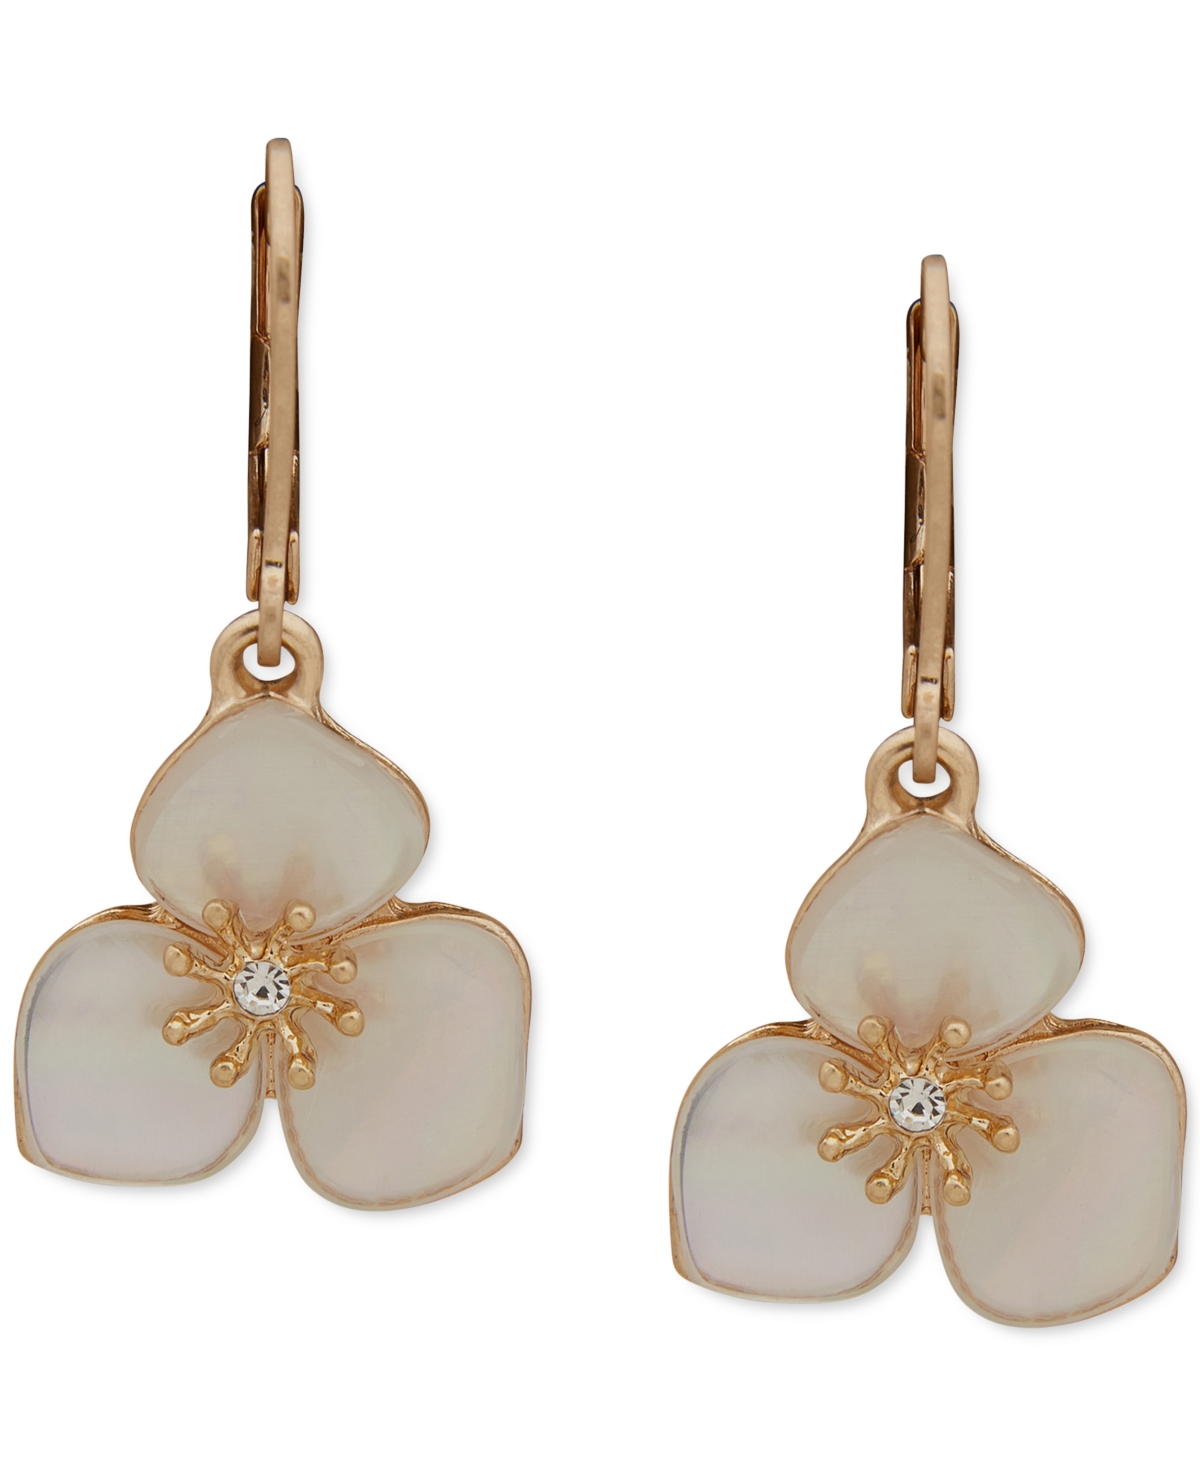 lonna & lilly Gold-Tone Crystal Iridescent Flower Drop Earrings